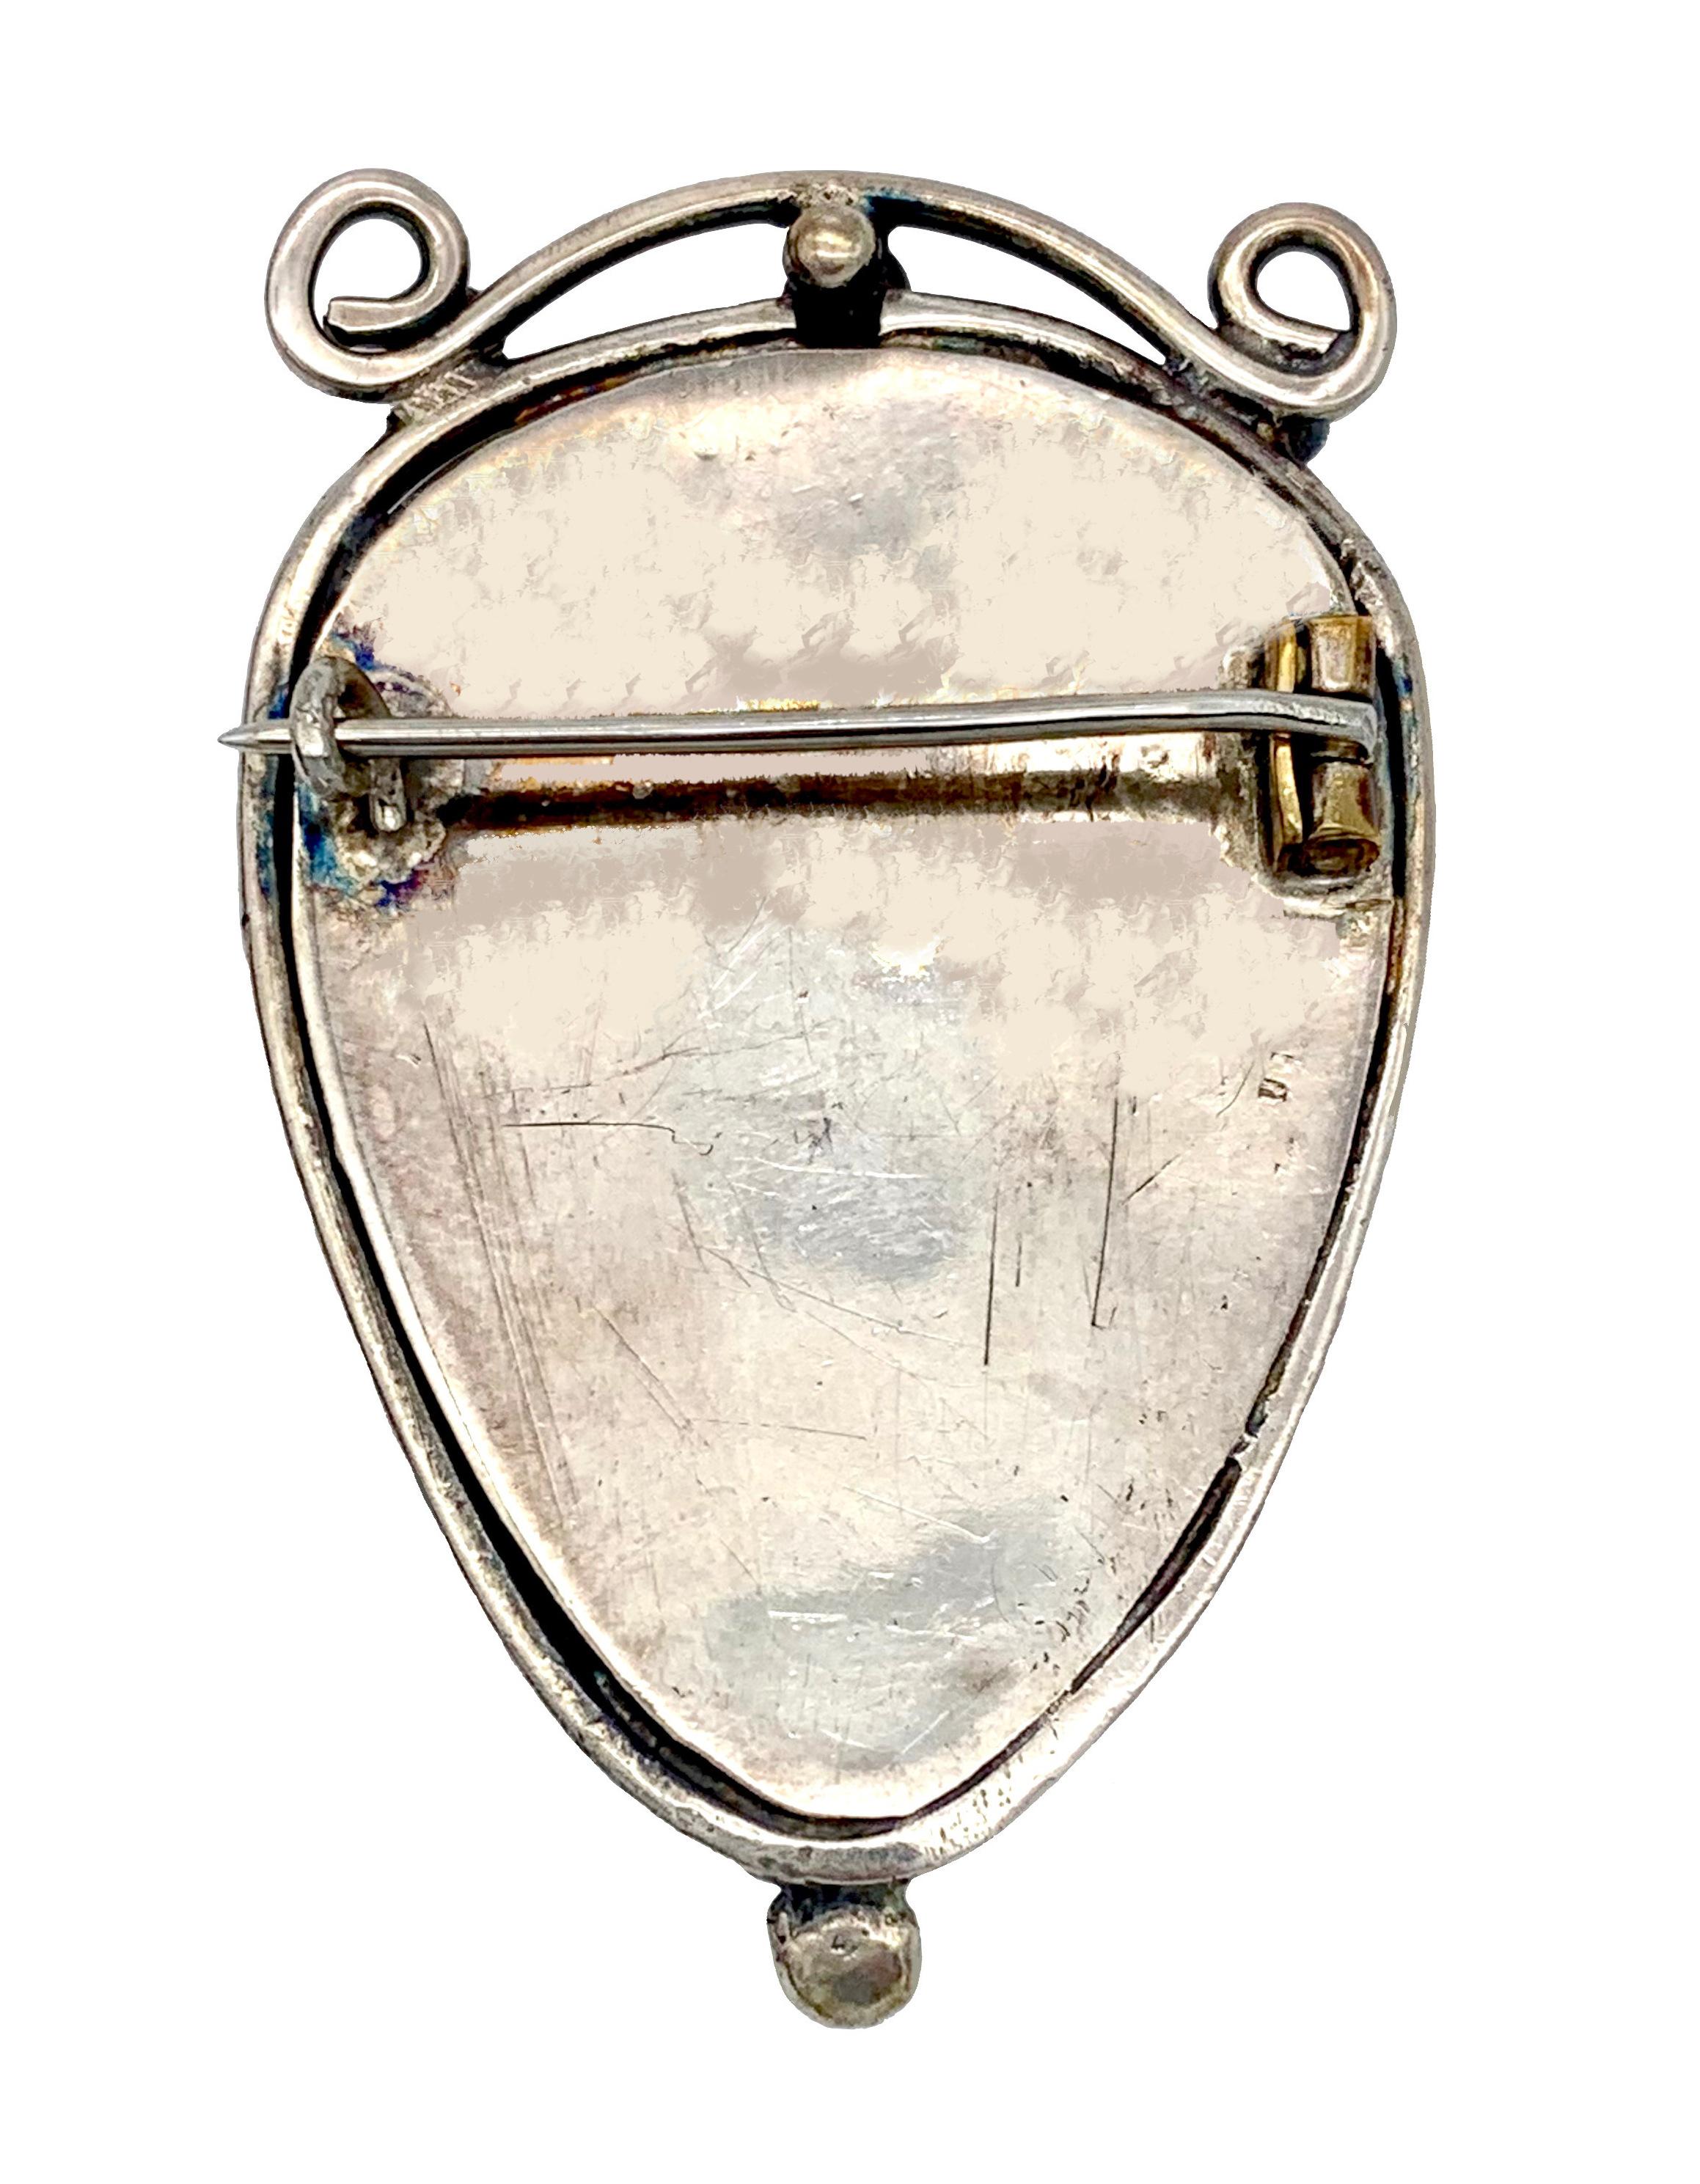 This elegant Art Nouveau brooch has been handcrafted out of silver in the last decade of the 19th century and set with a fine white convex piece of mother of pearl.